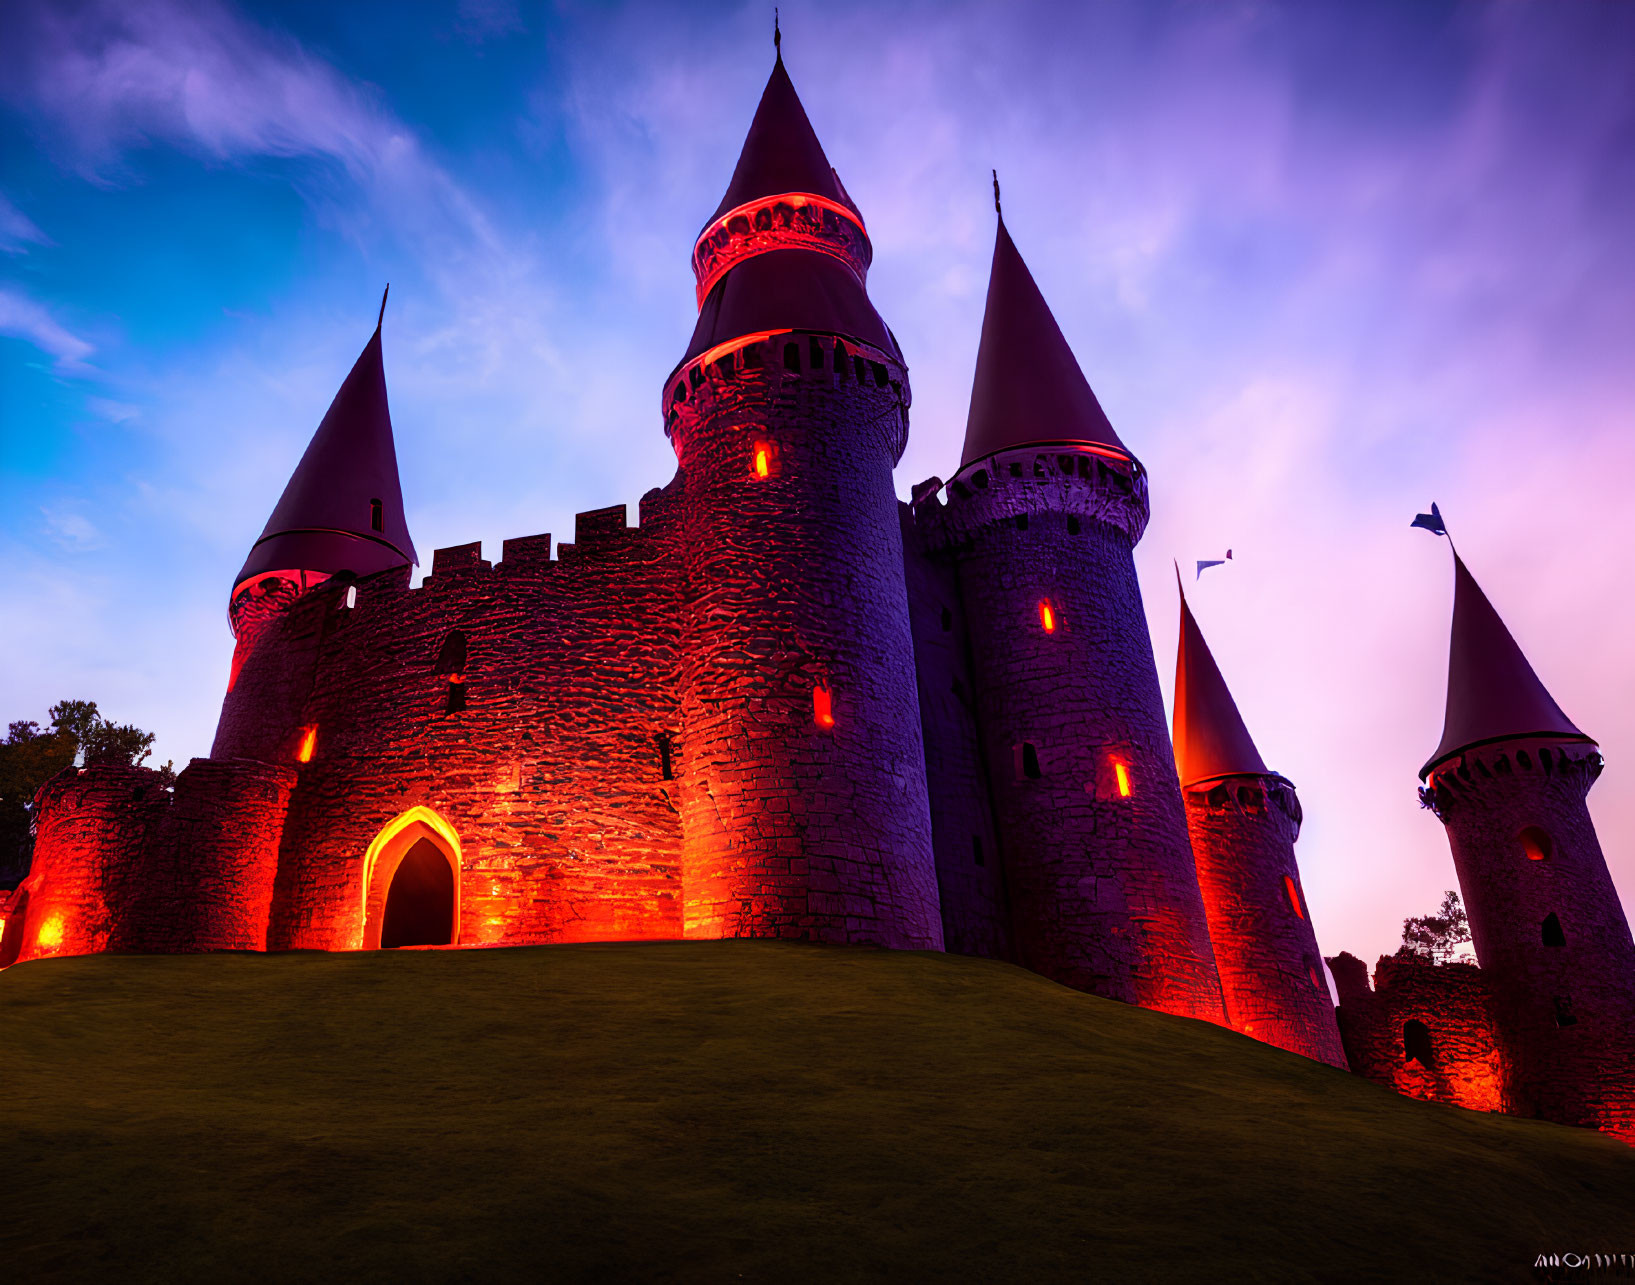 Majestic castle with colorful spires under red-lit twilight sky